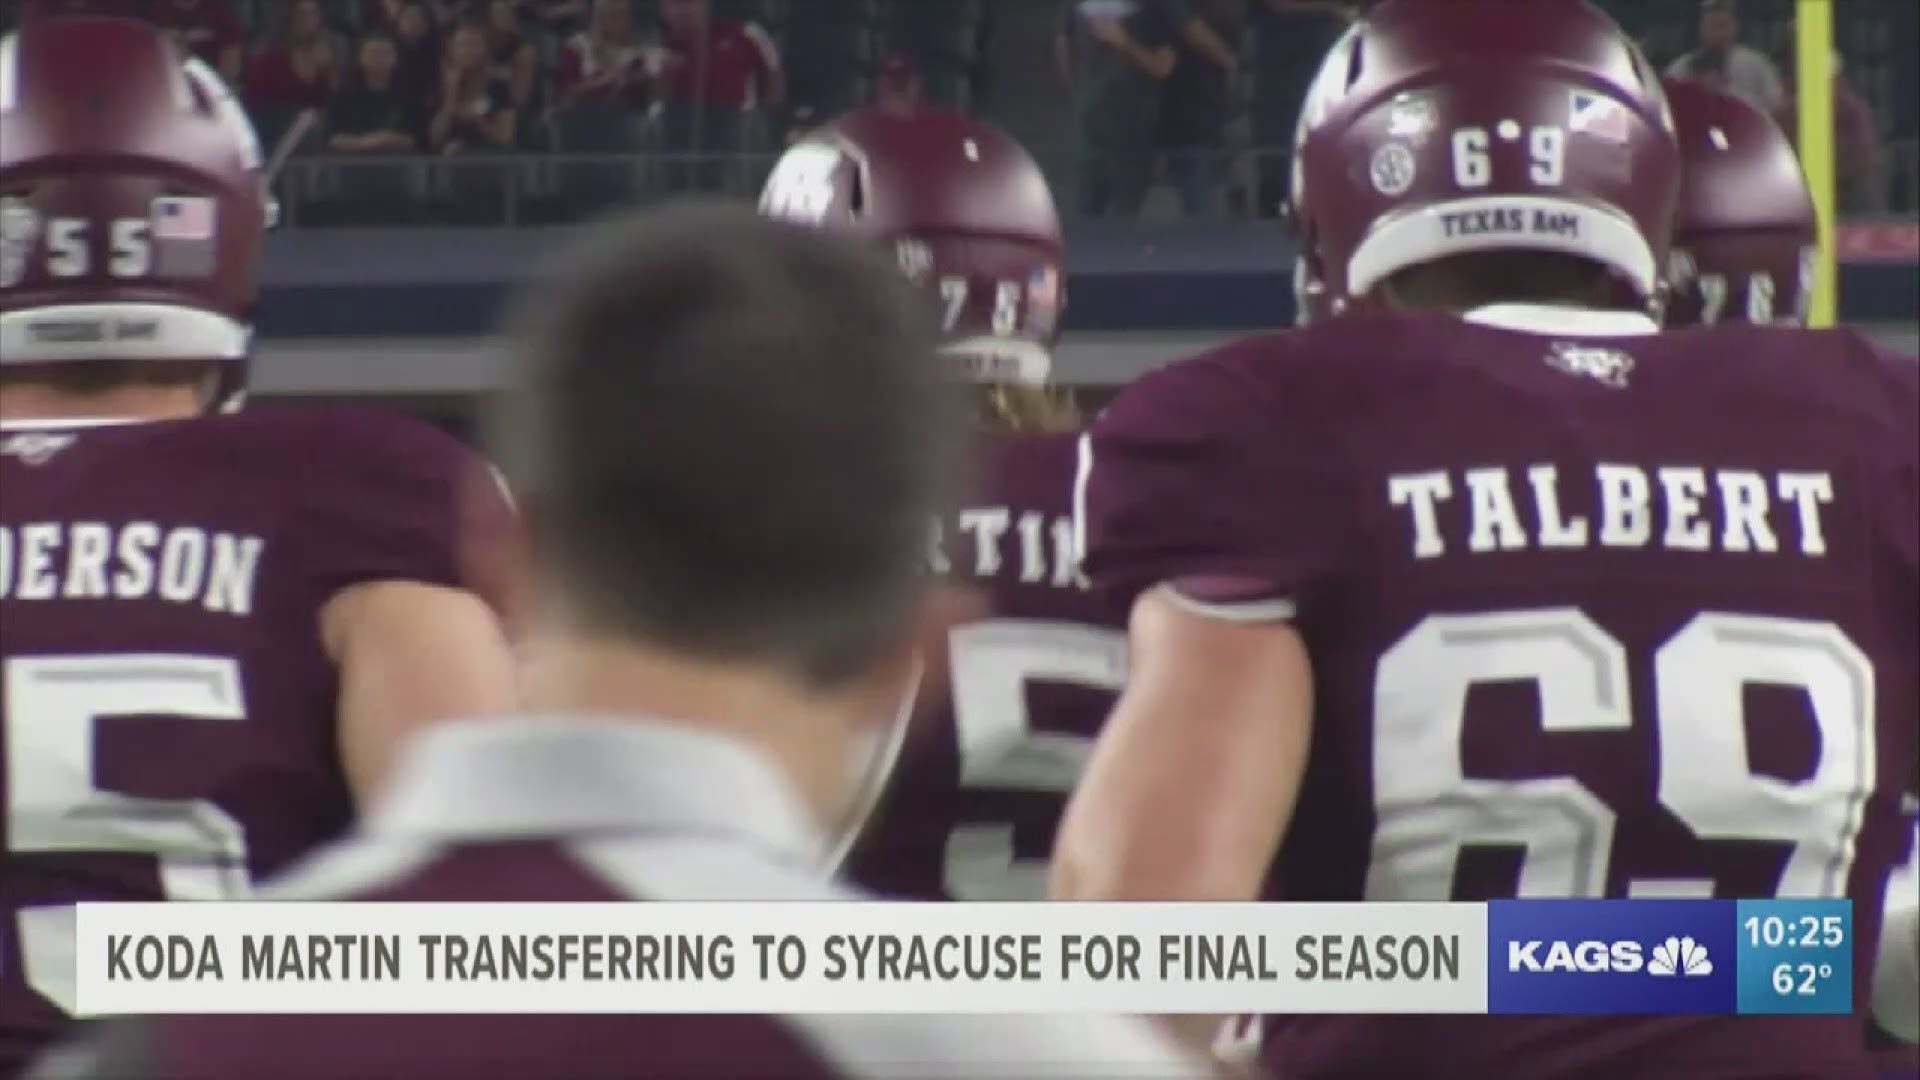 Texas A&M offensive lineman Koda Martin announced on Twitter on Thursday that he is transferring to Syracuse for his final year of eligibility.